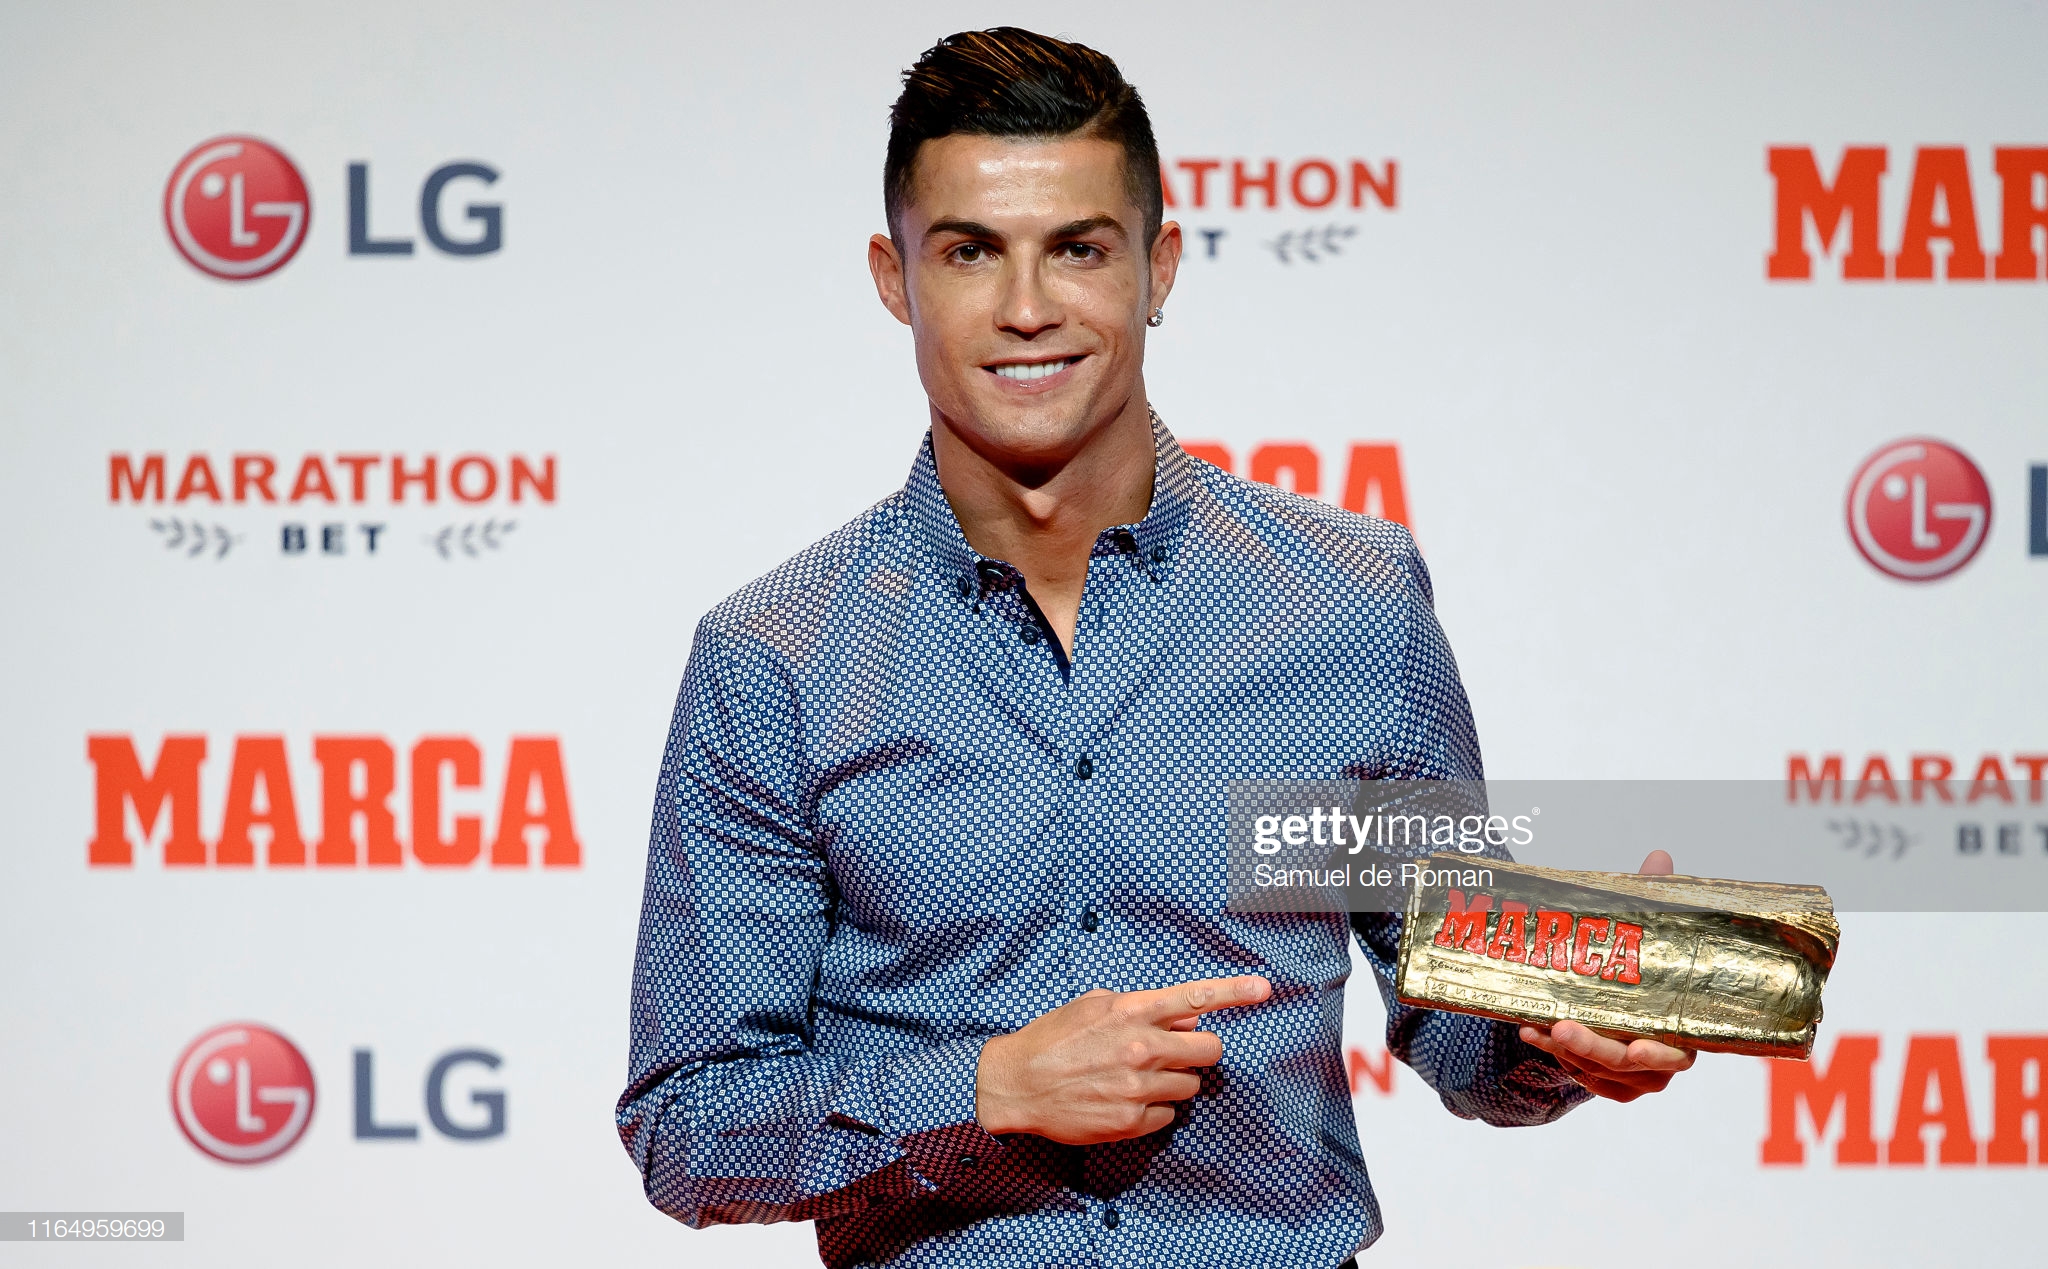 gettyimages-1164959699-2048x2048.jpg